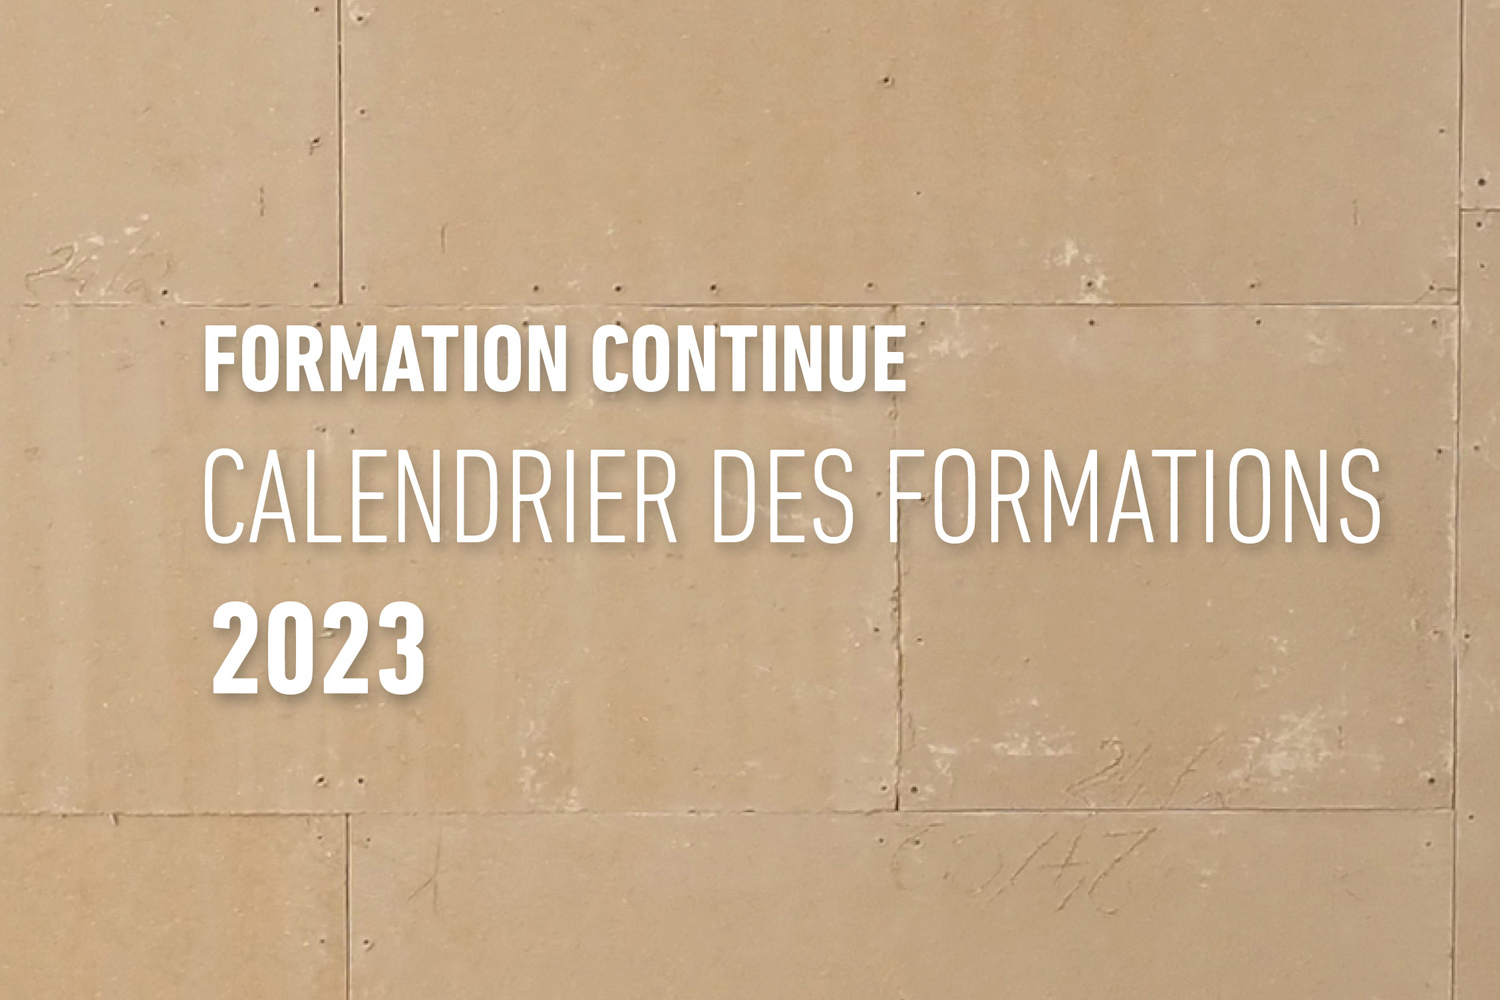 Calendrier des formations 2023